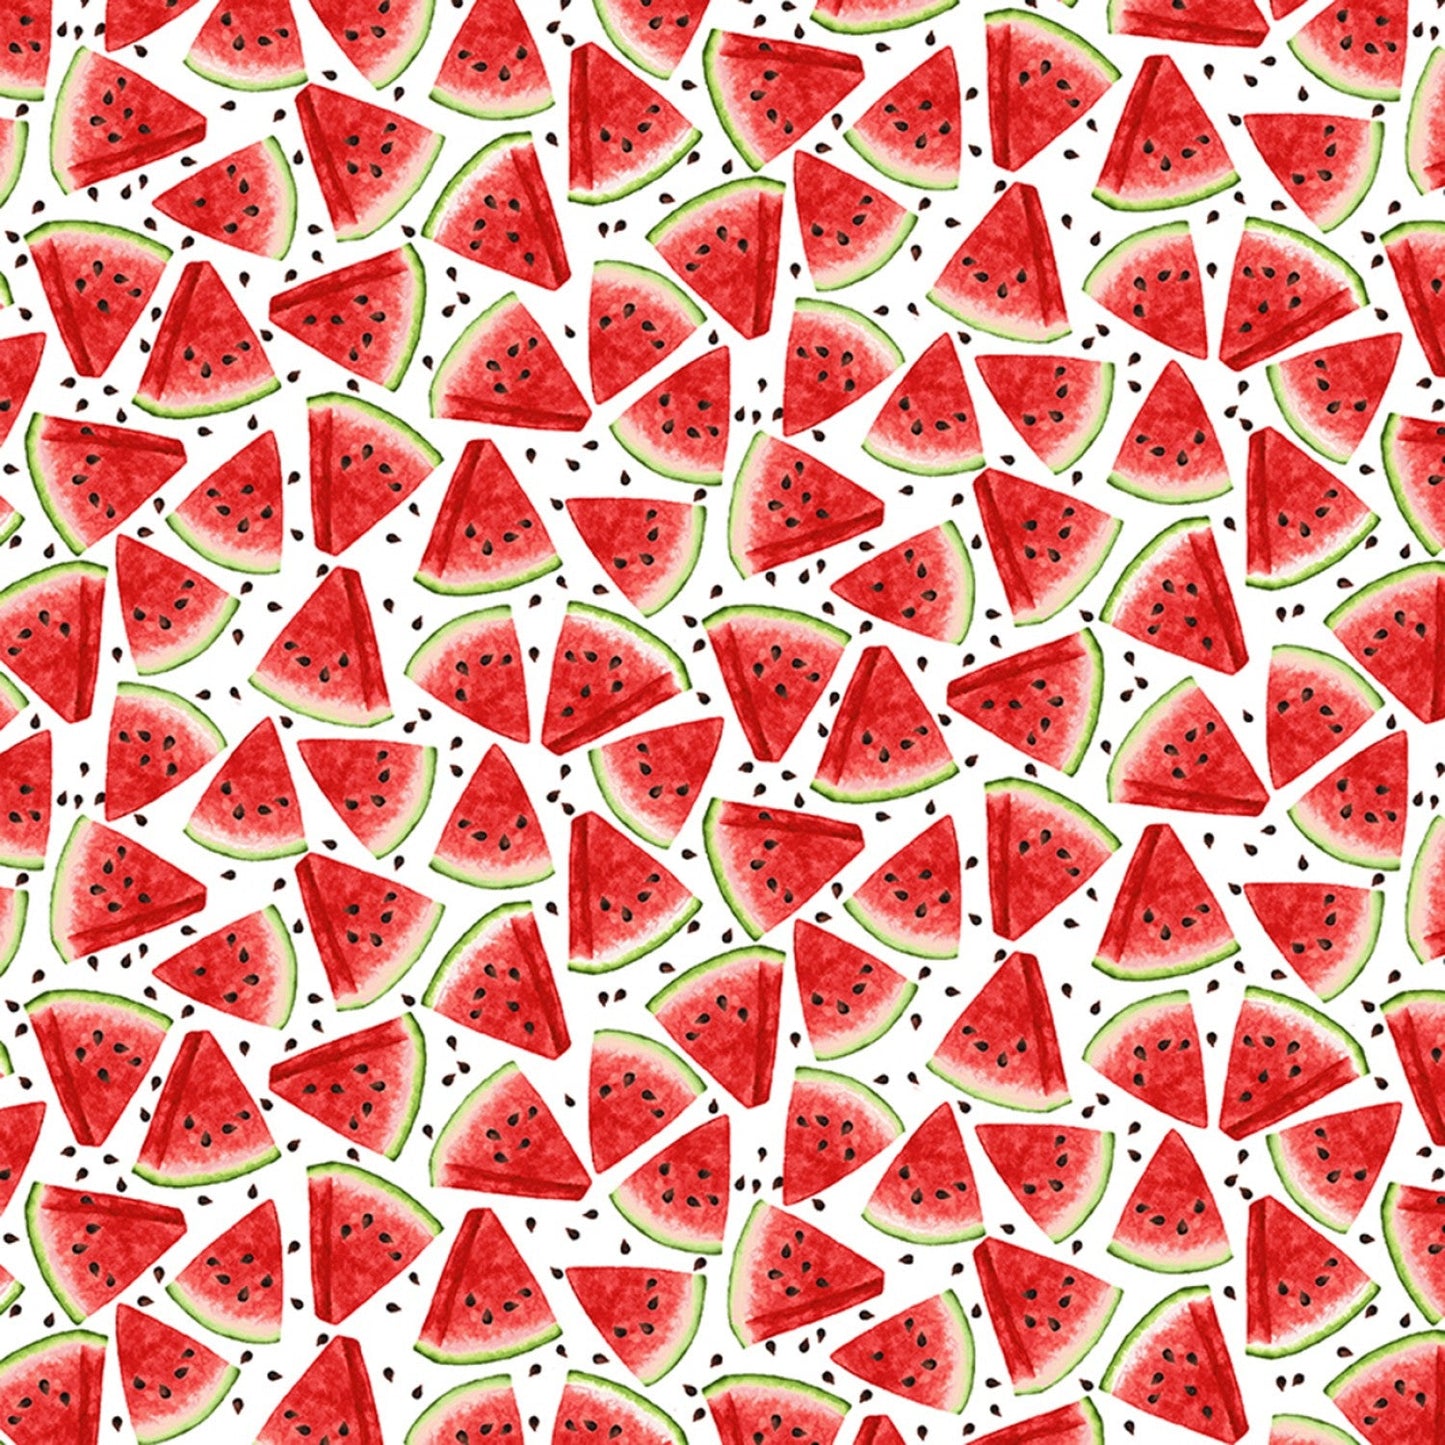 Watermelon Slices on Black Cotton Fabric by the Yard - Watermelon Party Collection